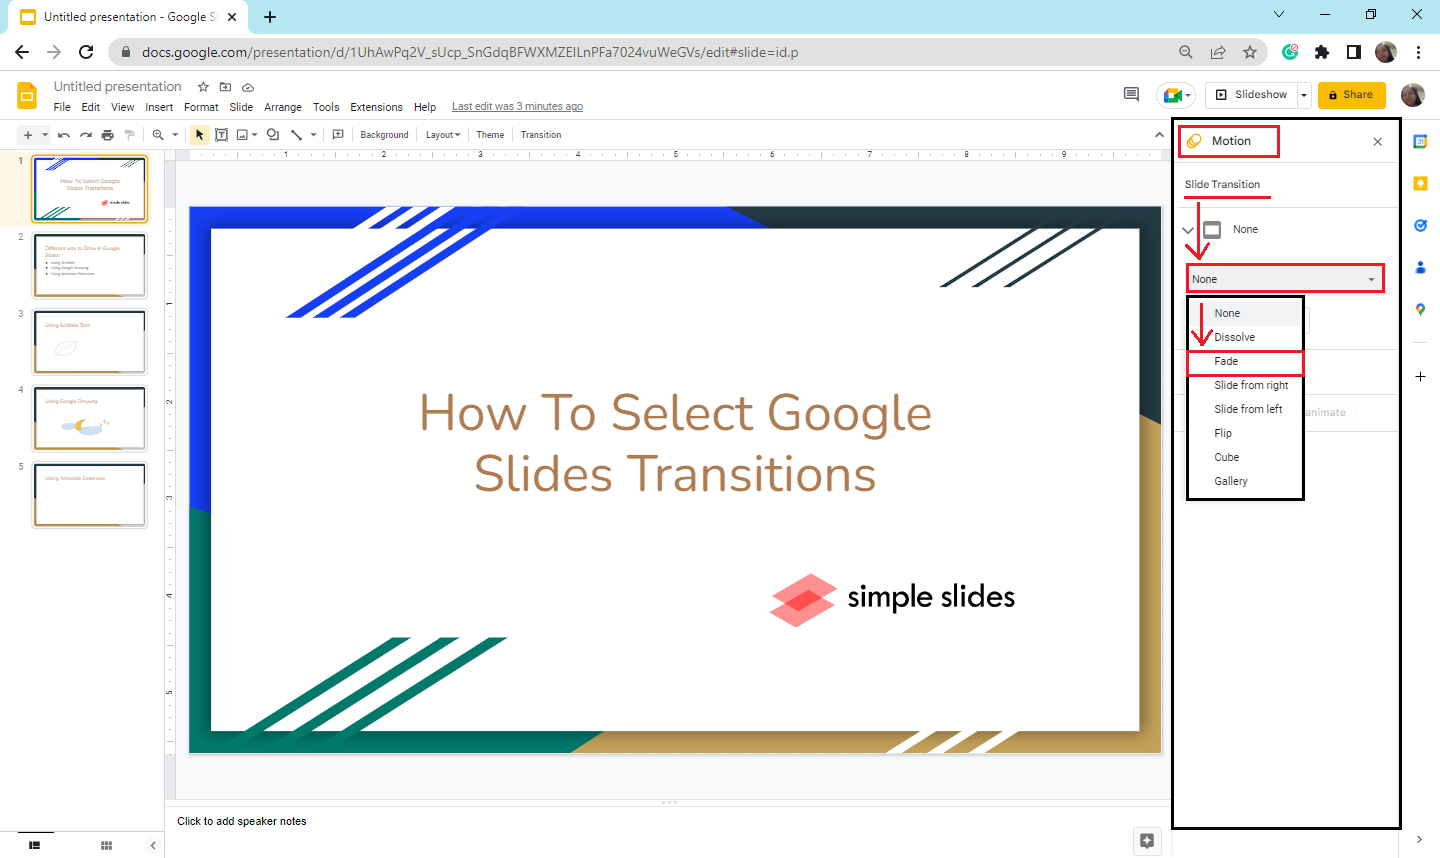 Learn How To Select Google Slides Transitions